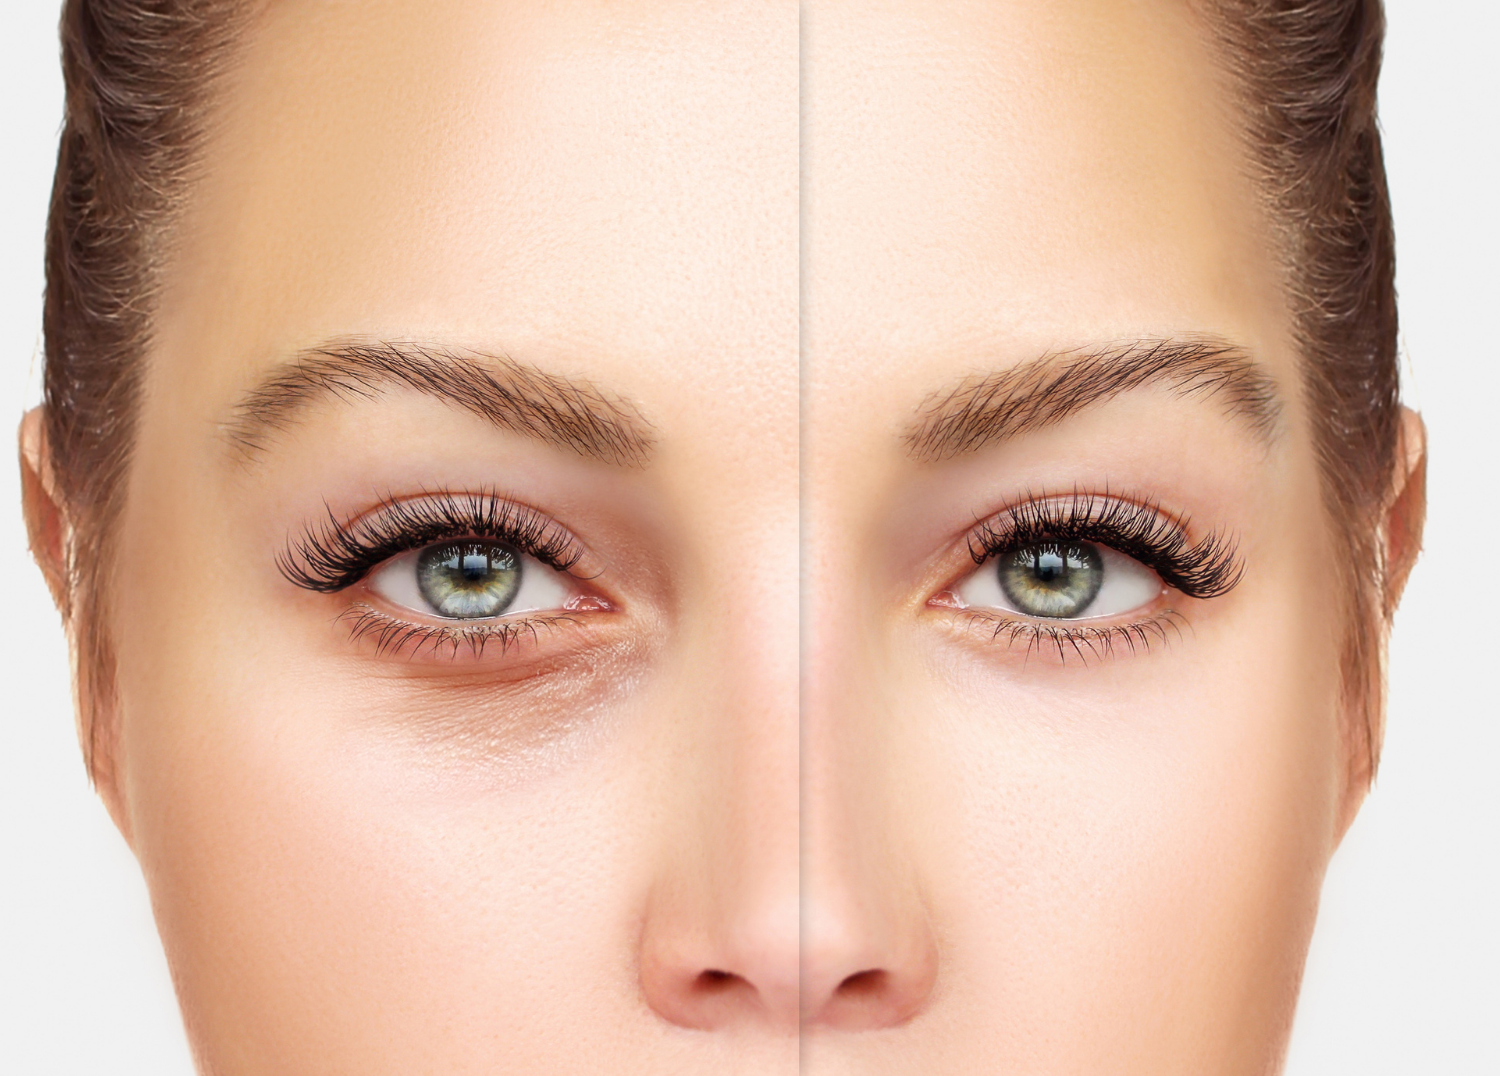 Causes of Under Eye Circles and How to Treat Them